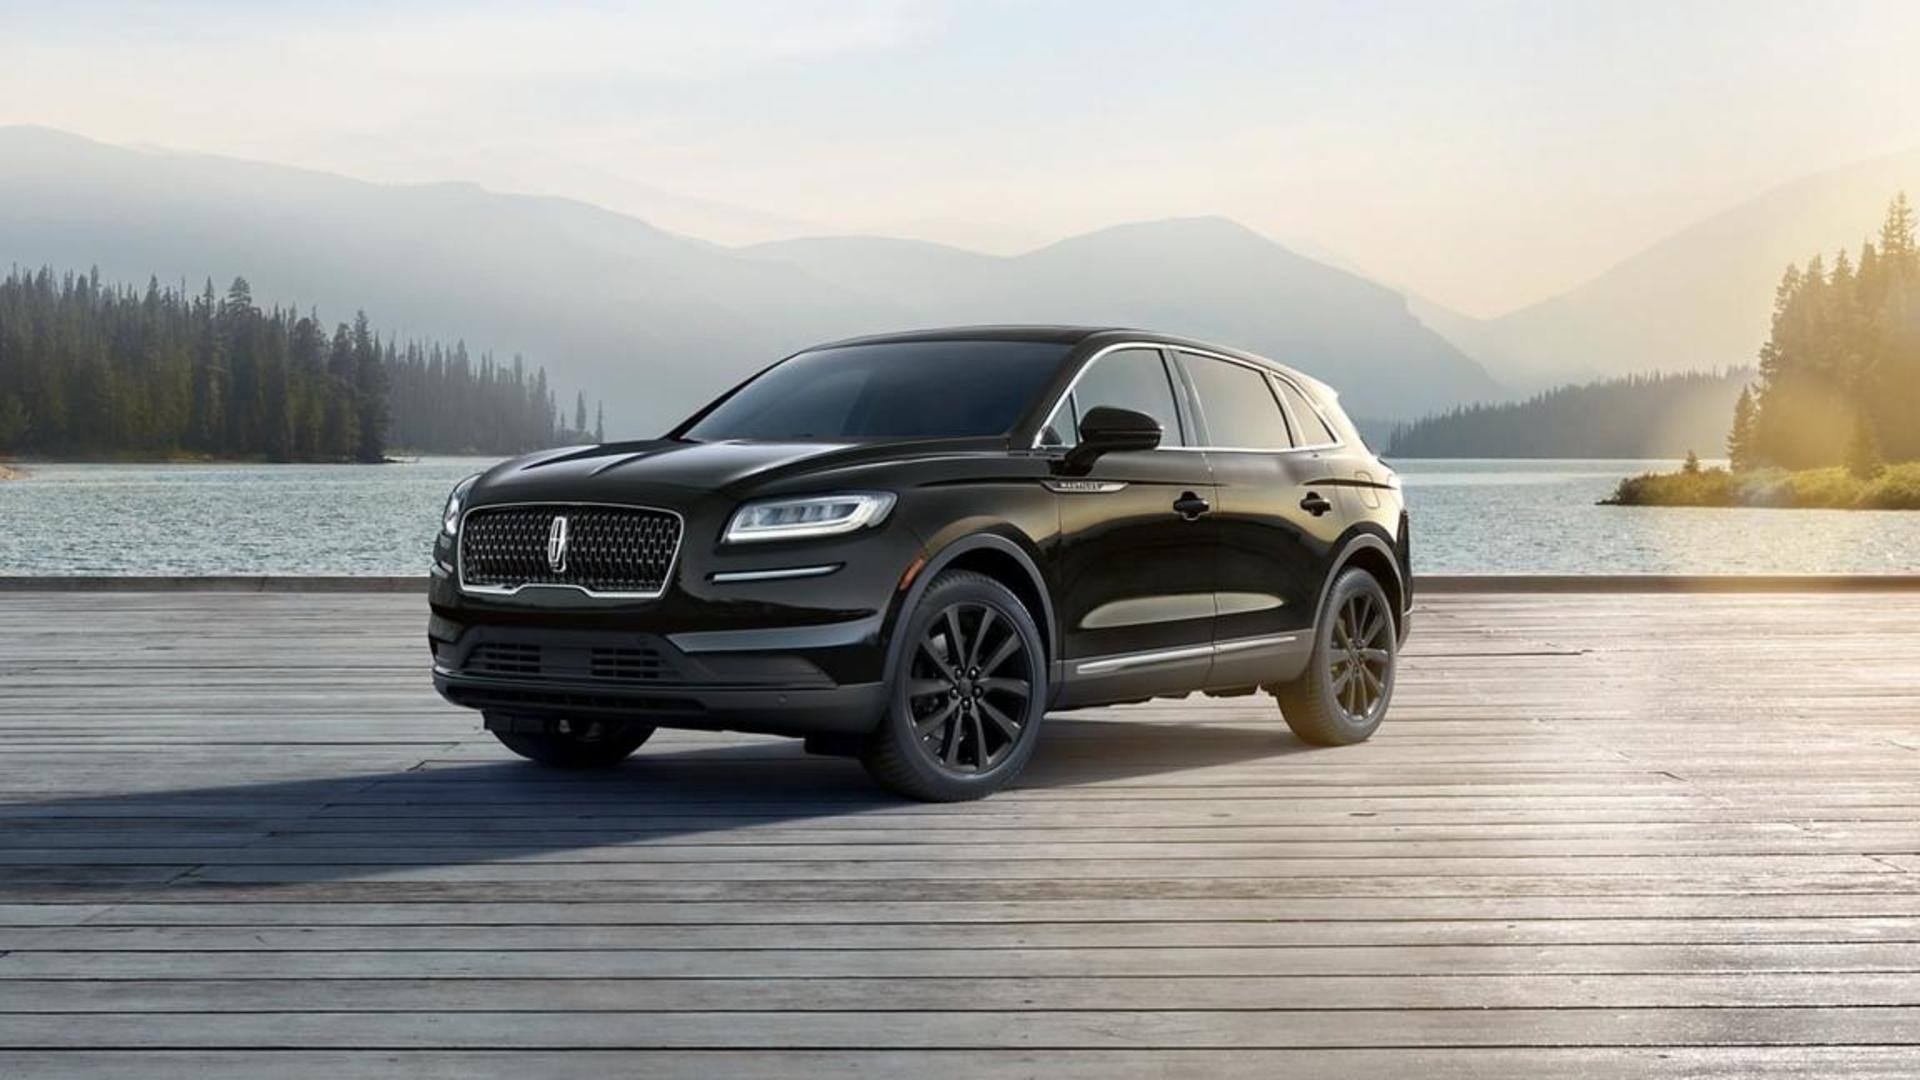 New-generation Lincoln Nautilus previewed ahead of launch: Check design